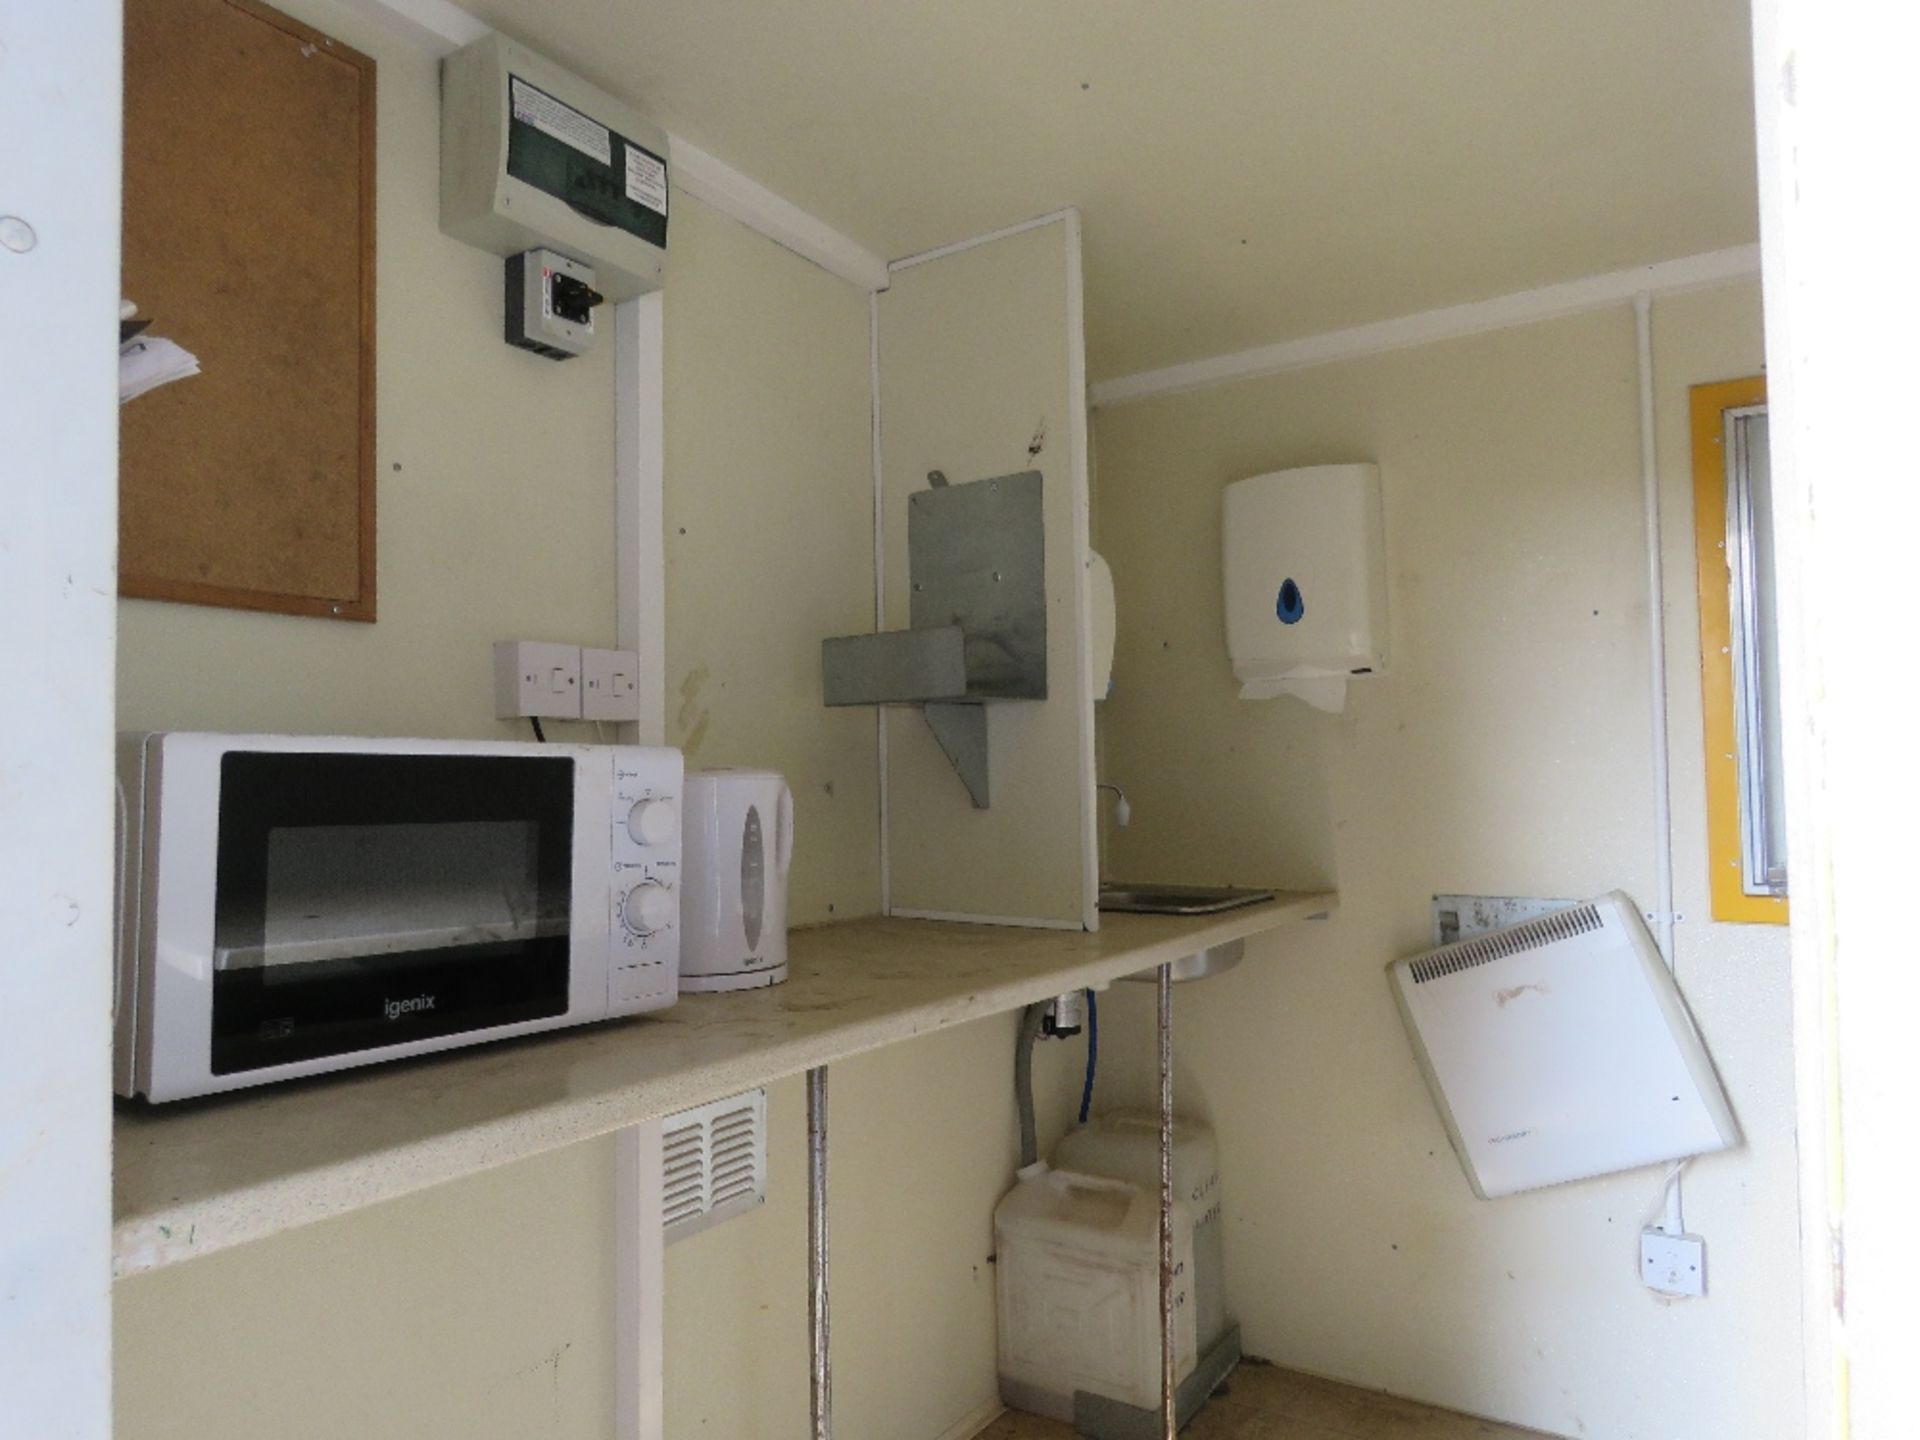 GROUNDHOG TOWED WELFARE UNIT WITH KITCHEN AREA, TOILET AND DRYING AREA PLUS A DIESEL GENERATOR. WHEN - Image 12 of 13